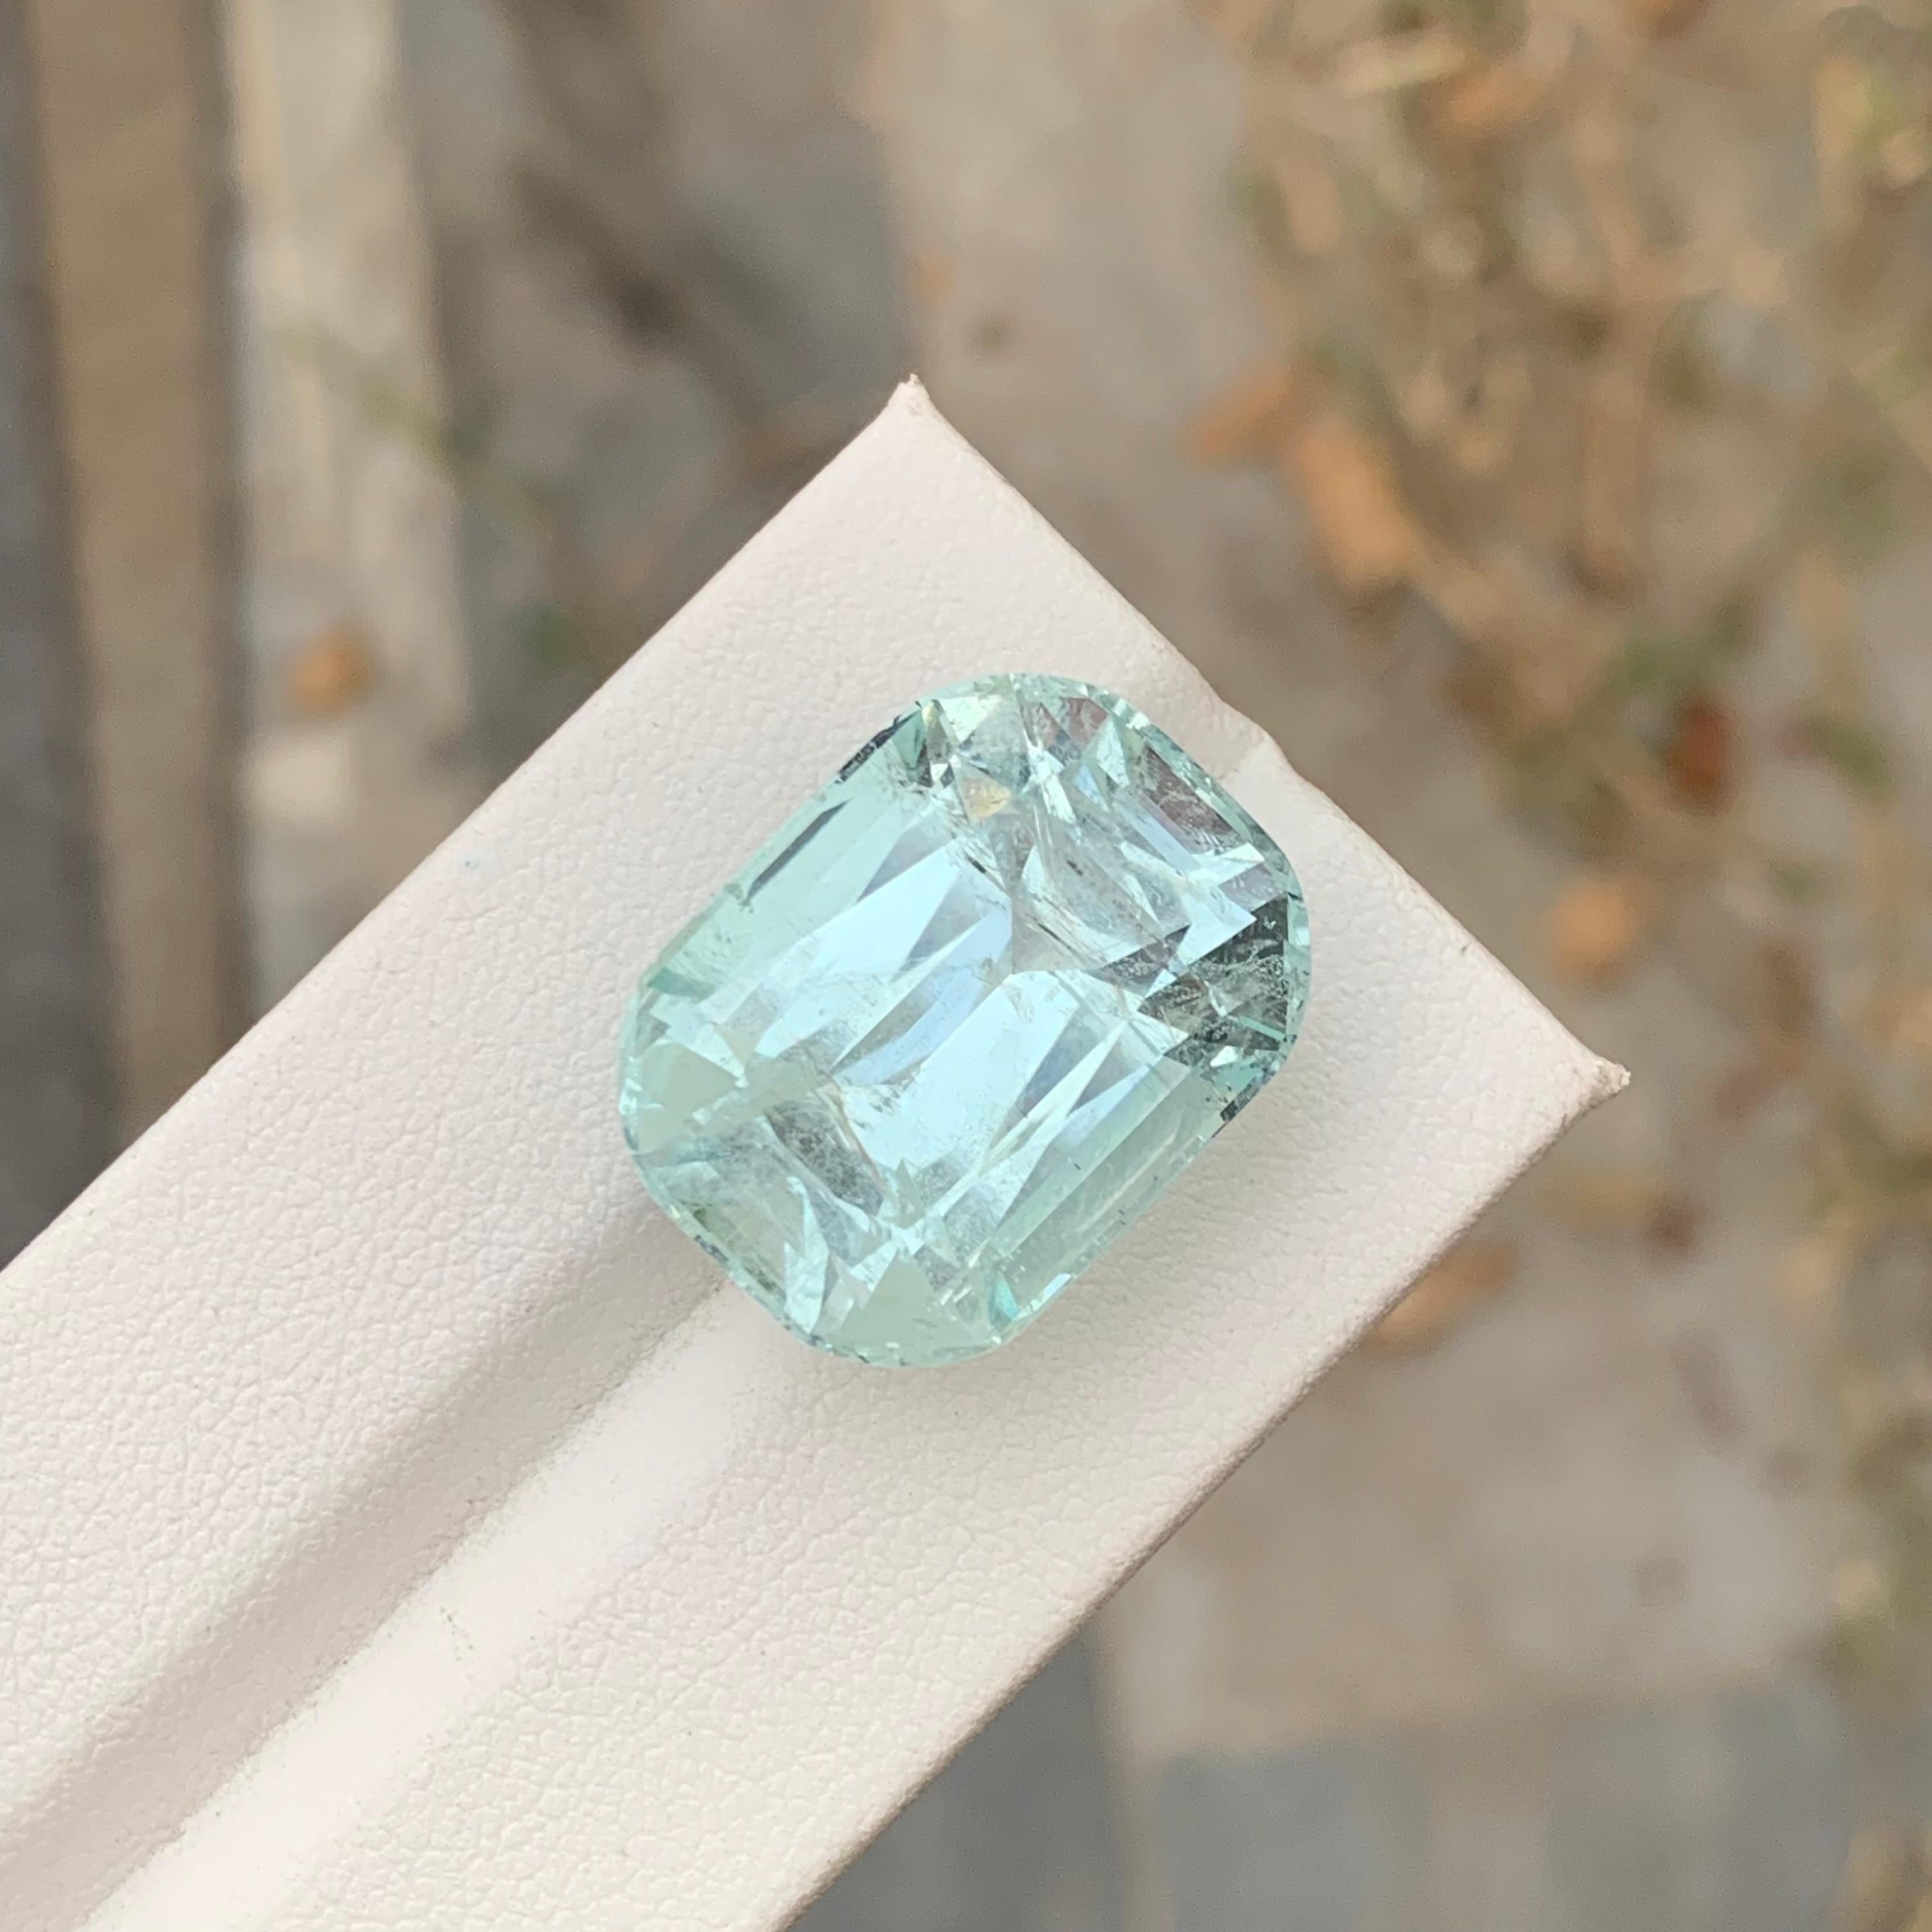 Arts and Crafts 29.75 Carats Gigantic Natural Loose Aquamarine Included Gem For Necklace Jewelry For Sale